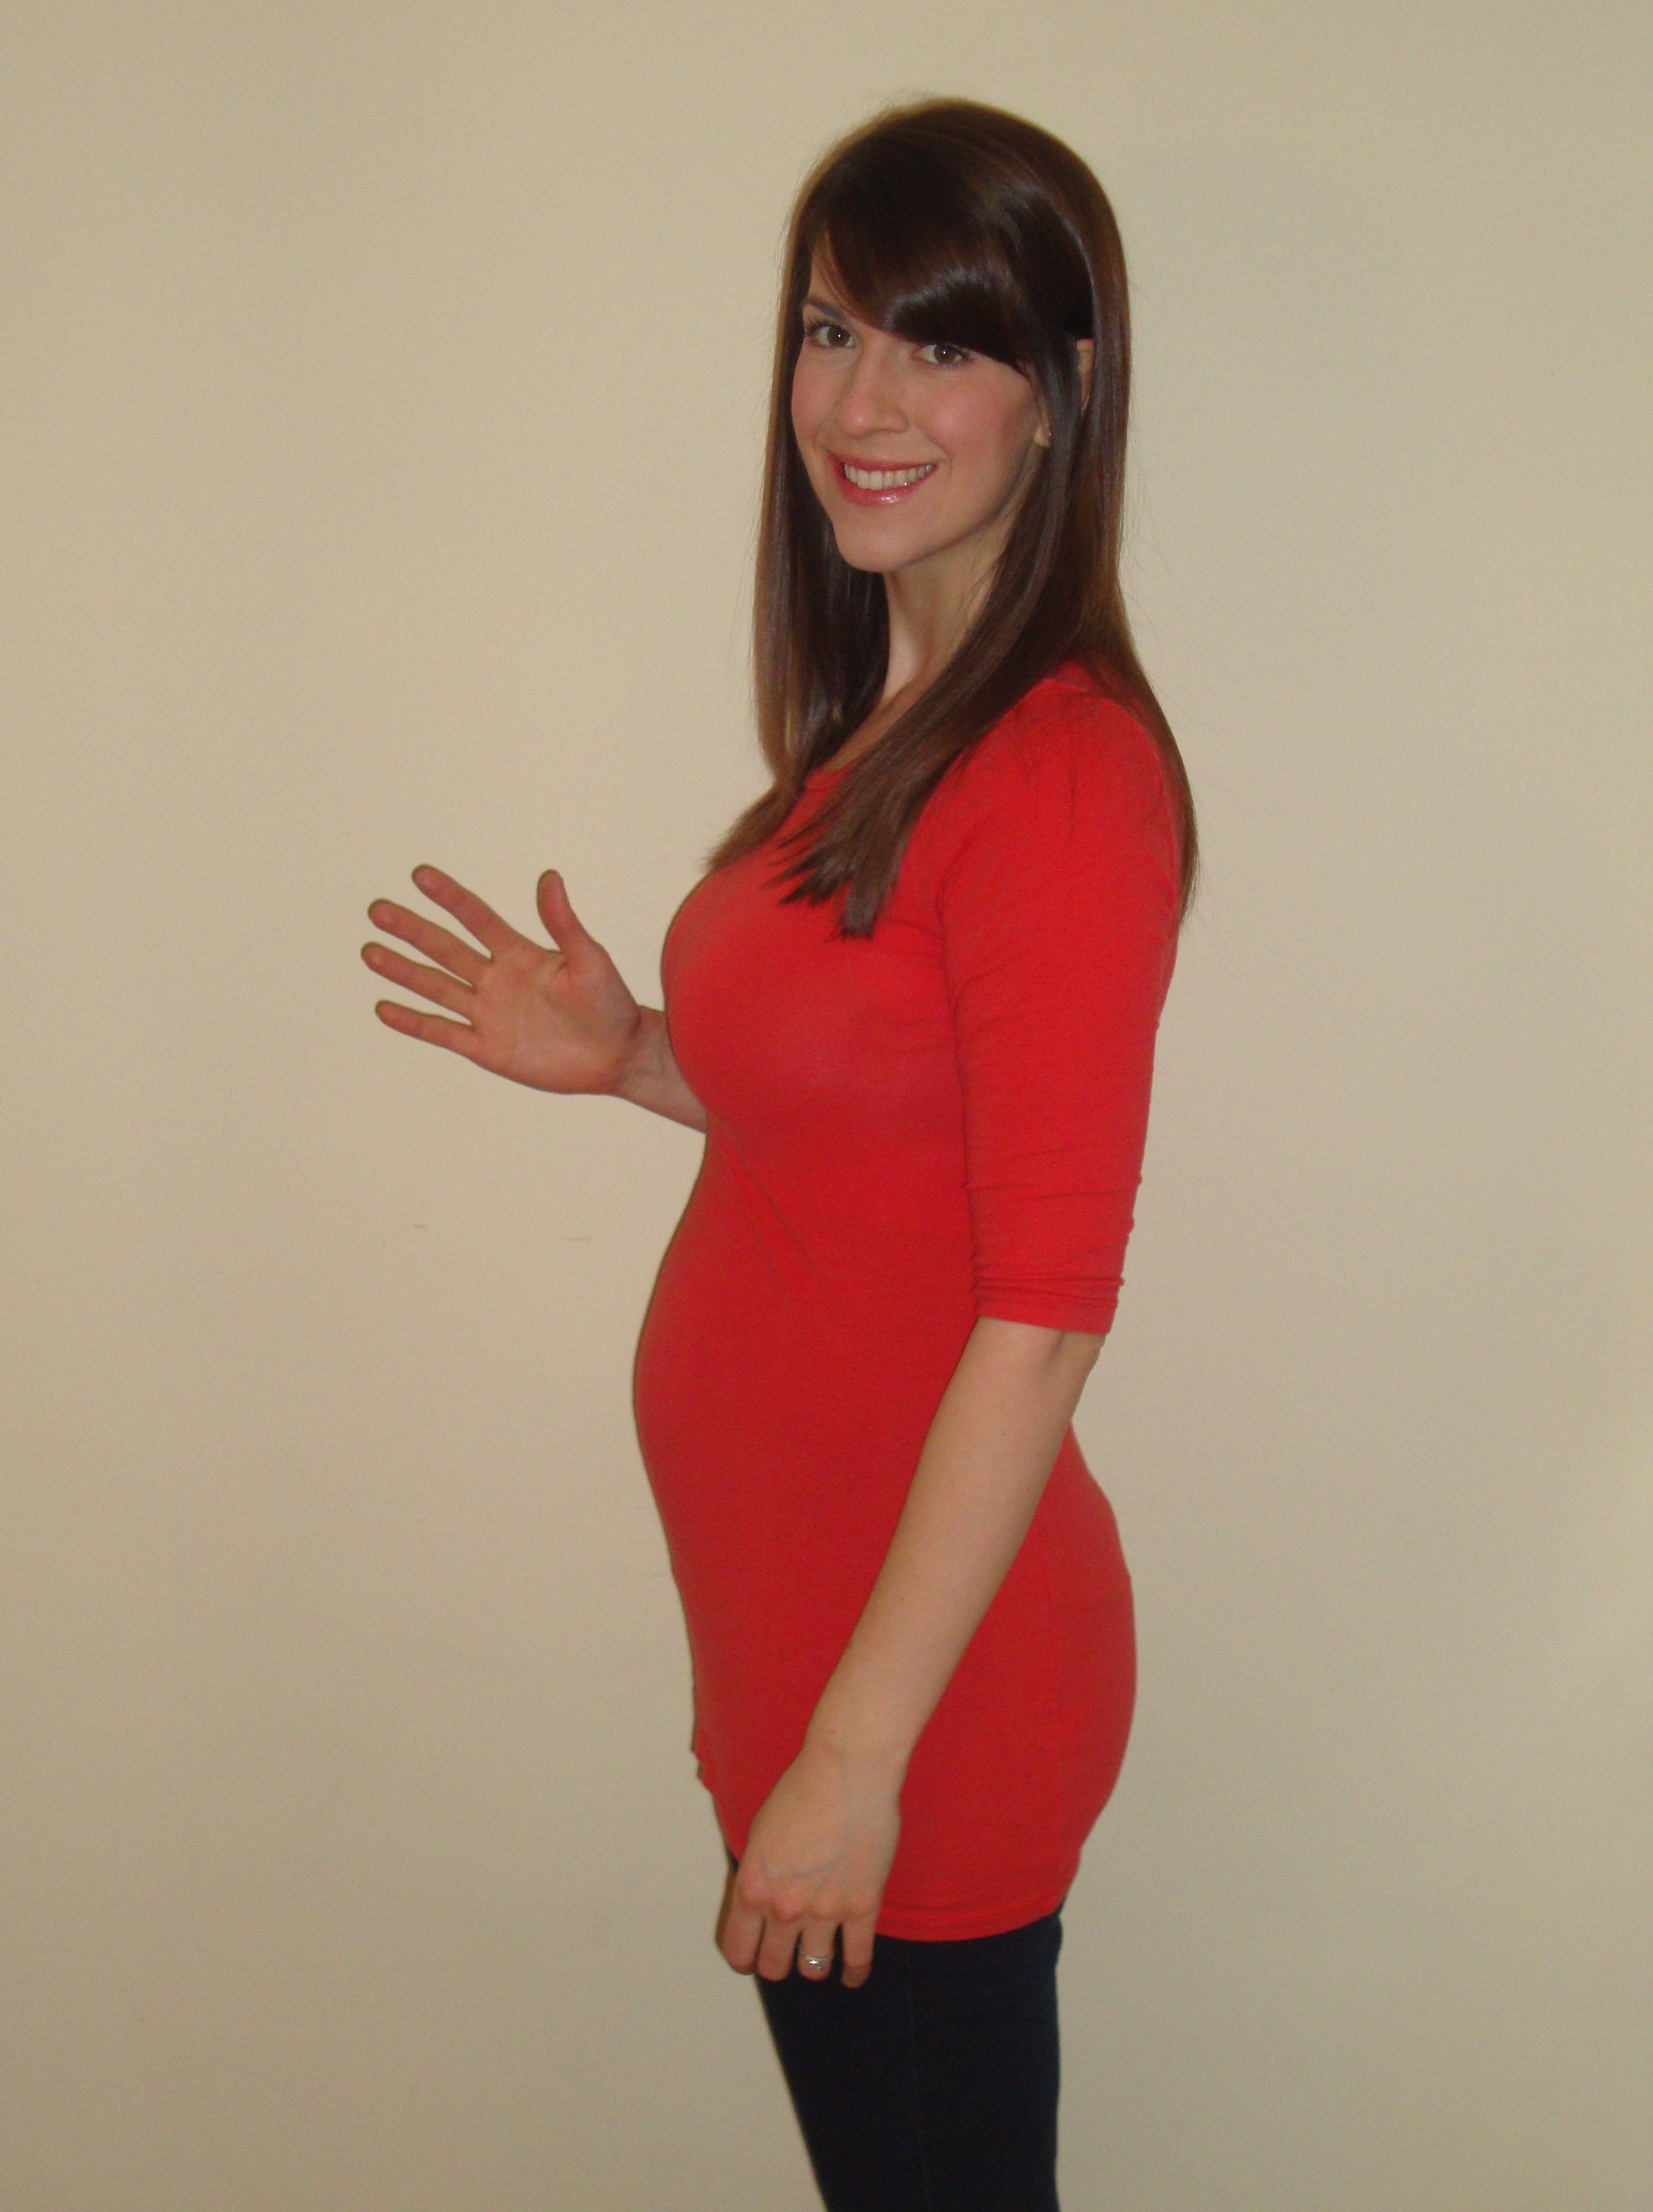 5 month baby bump